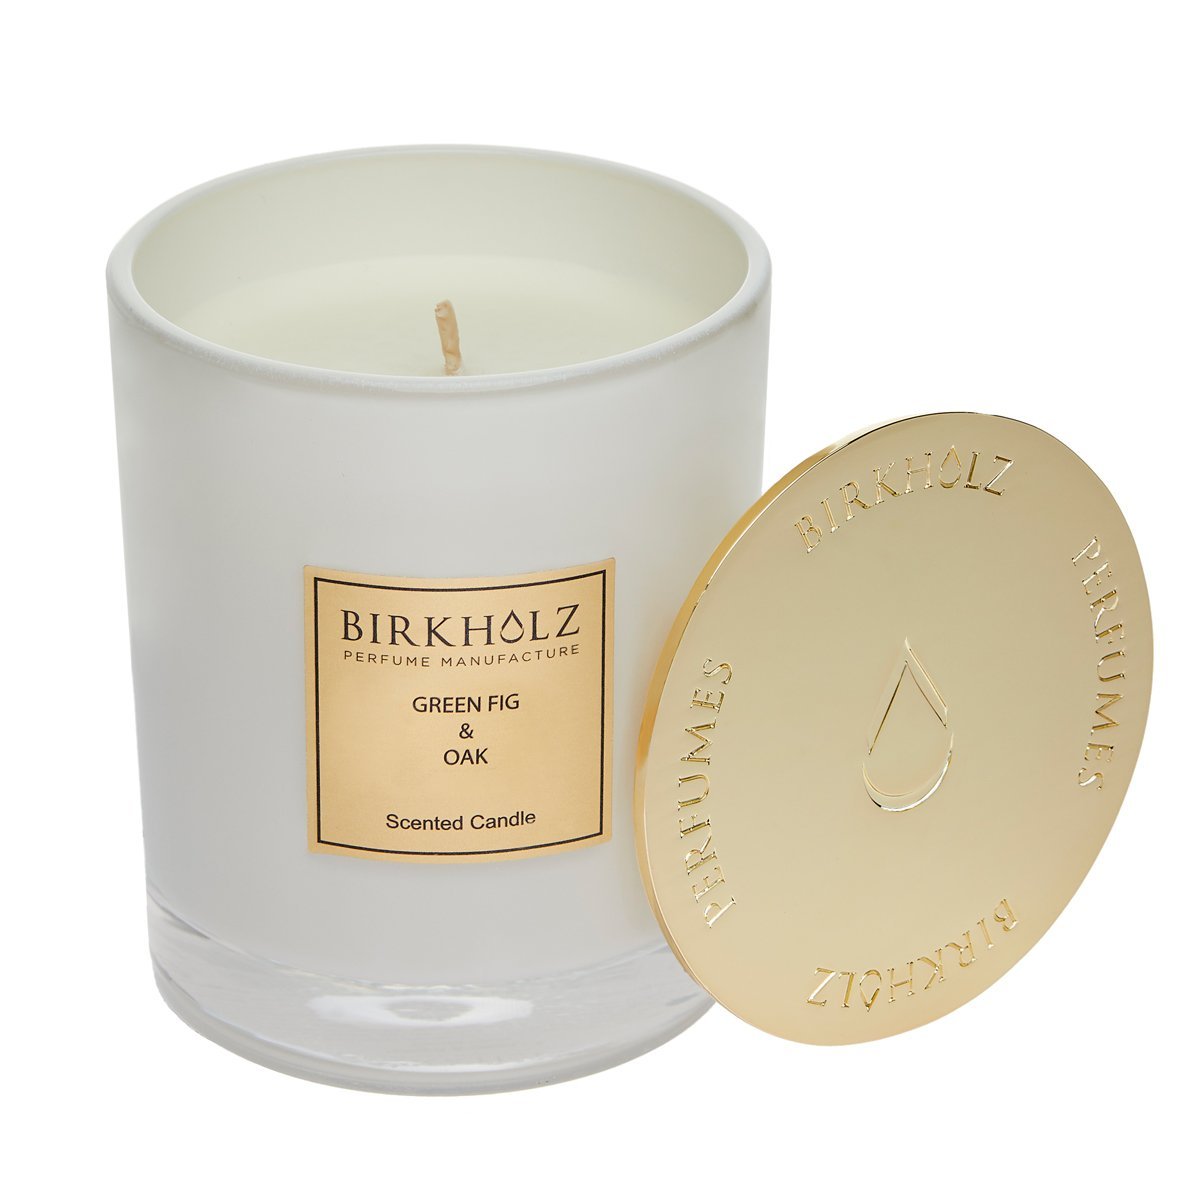 Scented Candle Green Fig & Oak - Birkholz Perfume Manufacture